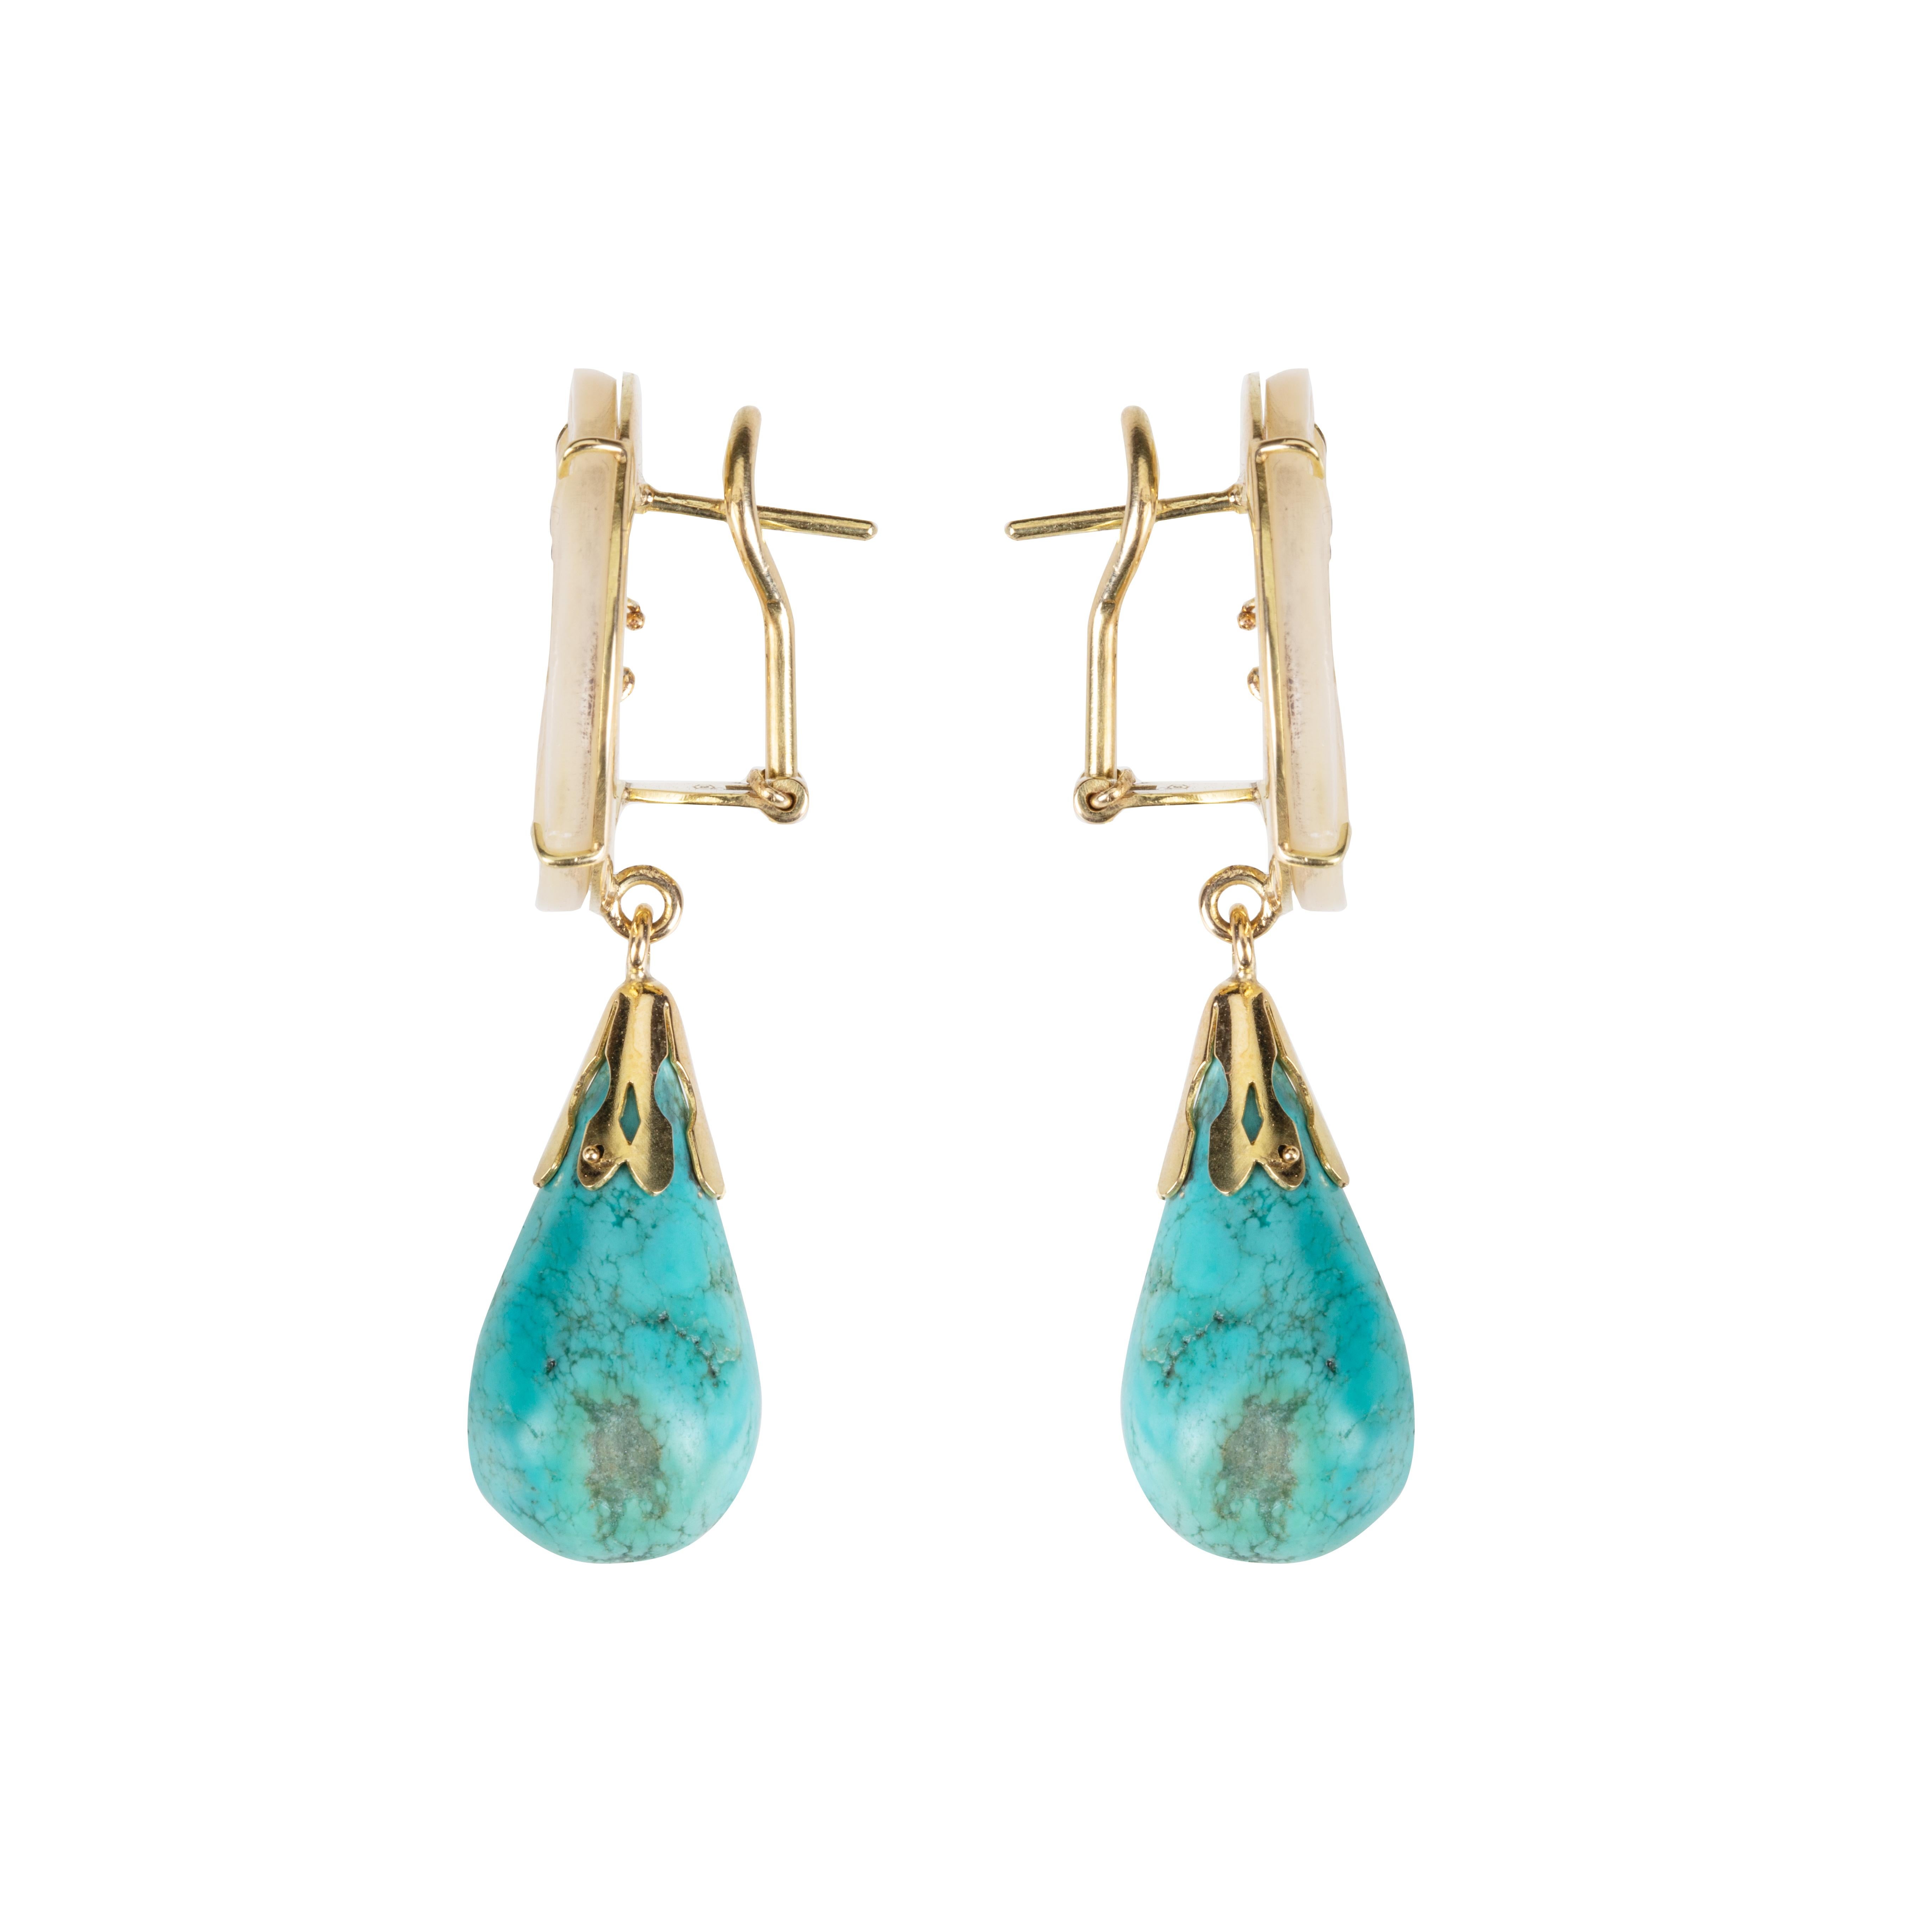 Artist Gold Turquoise Mother of Pearl Earrings For Sale